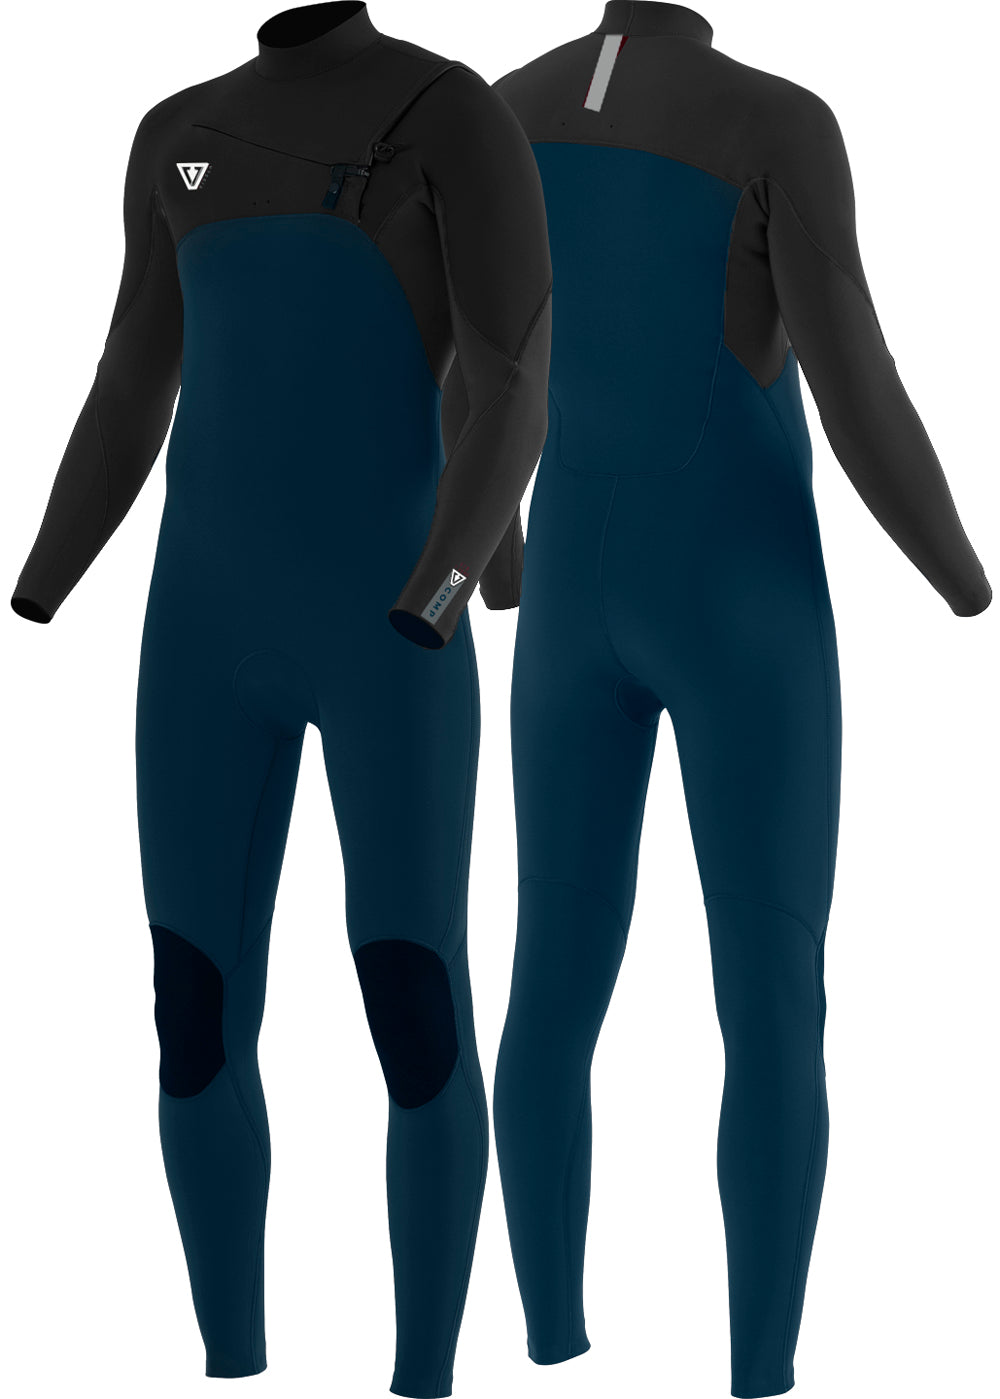 7 Seas Comp Navy and Black 3-2 Full Chest Zip Wetsuit. Front and Back View.